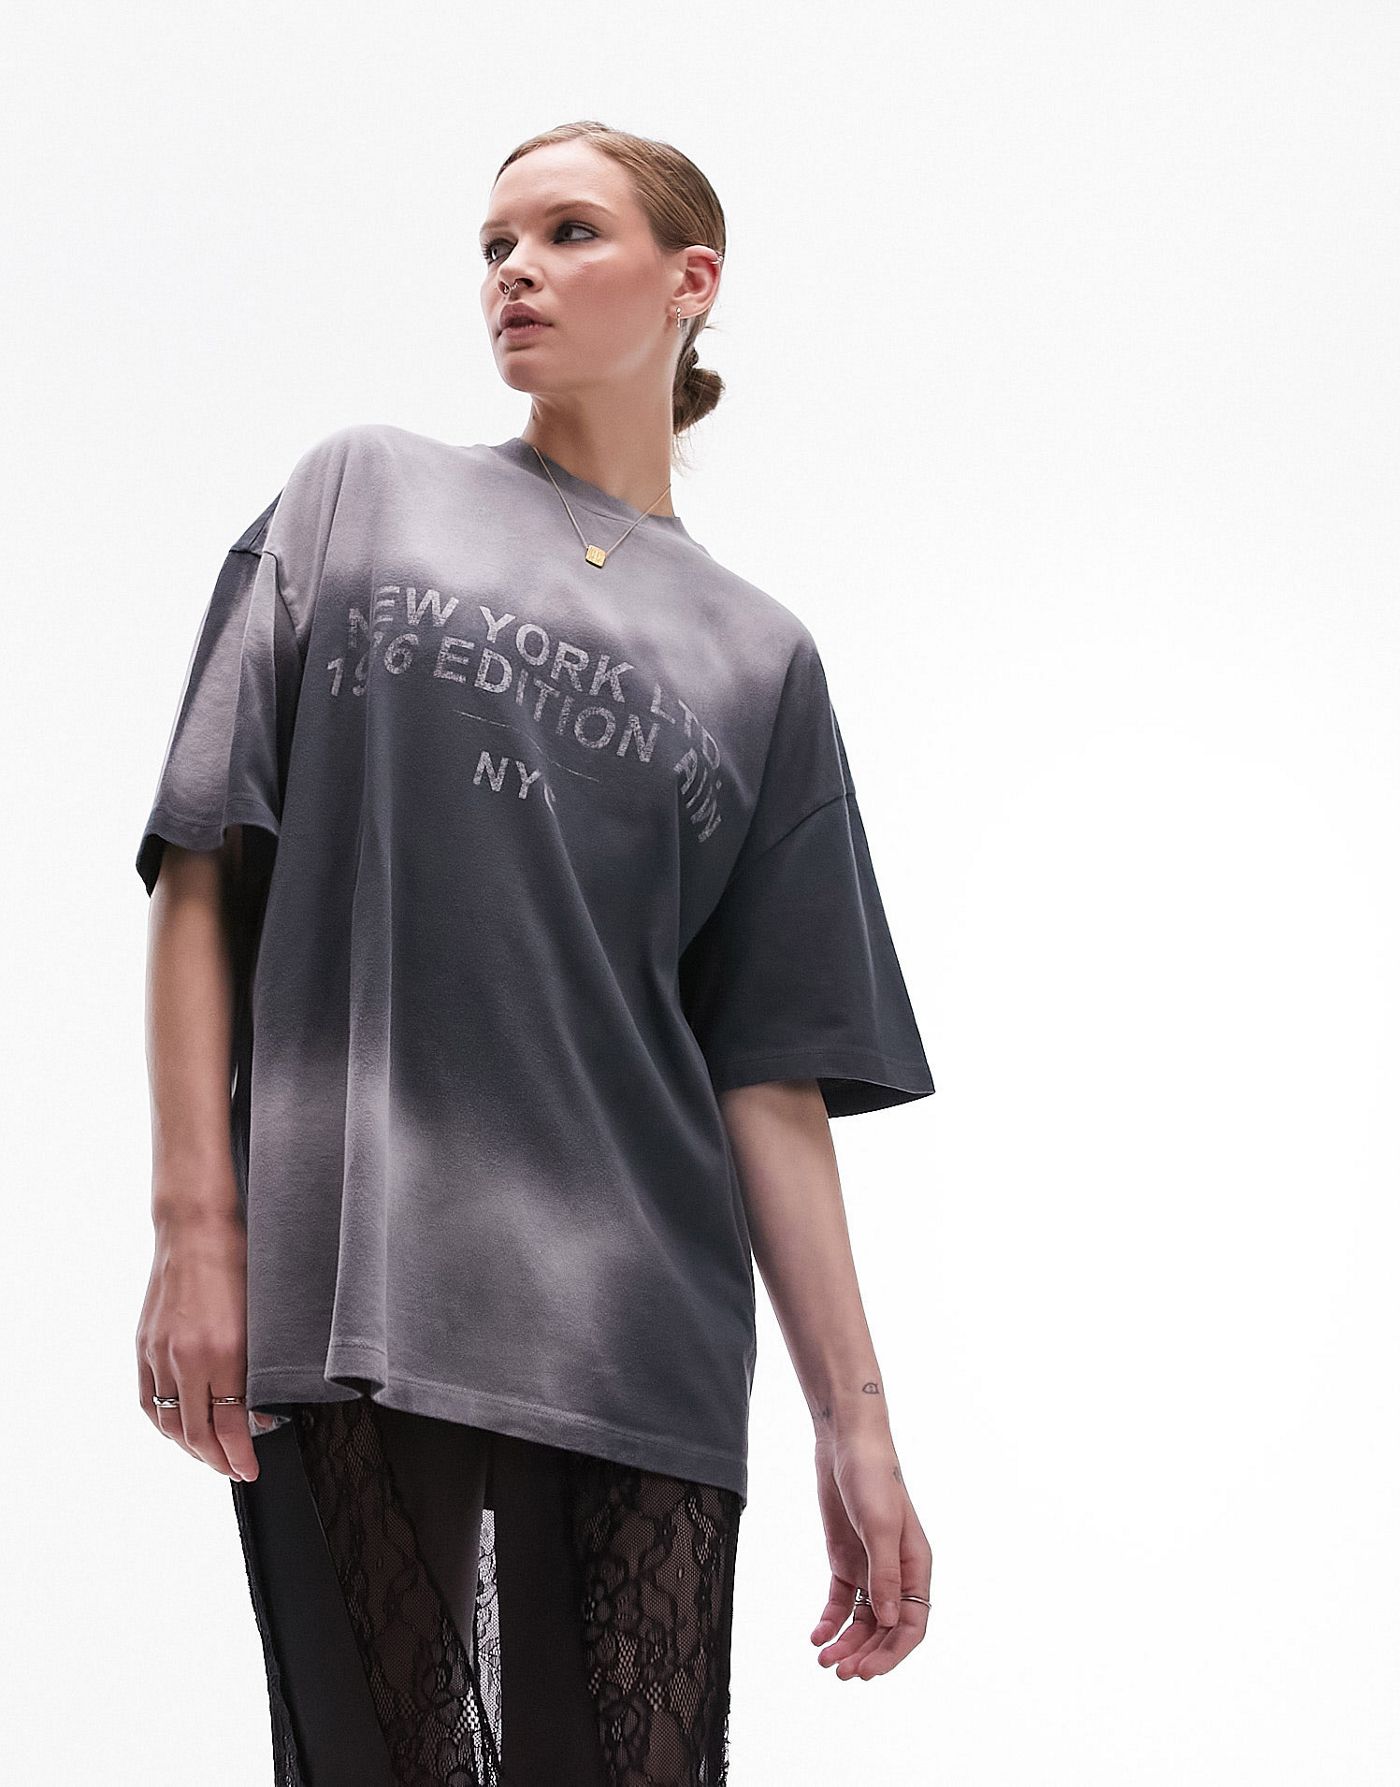 Topshop graphic New York spray oversized tee in charcoal